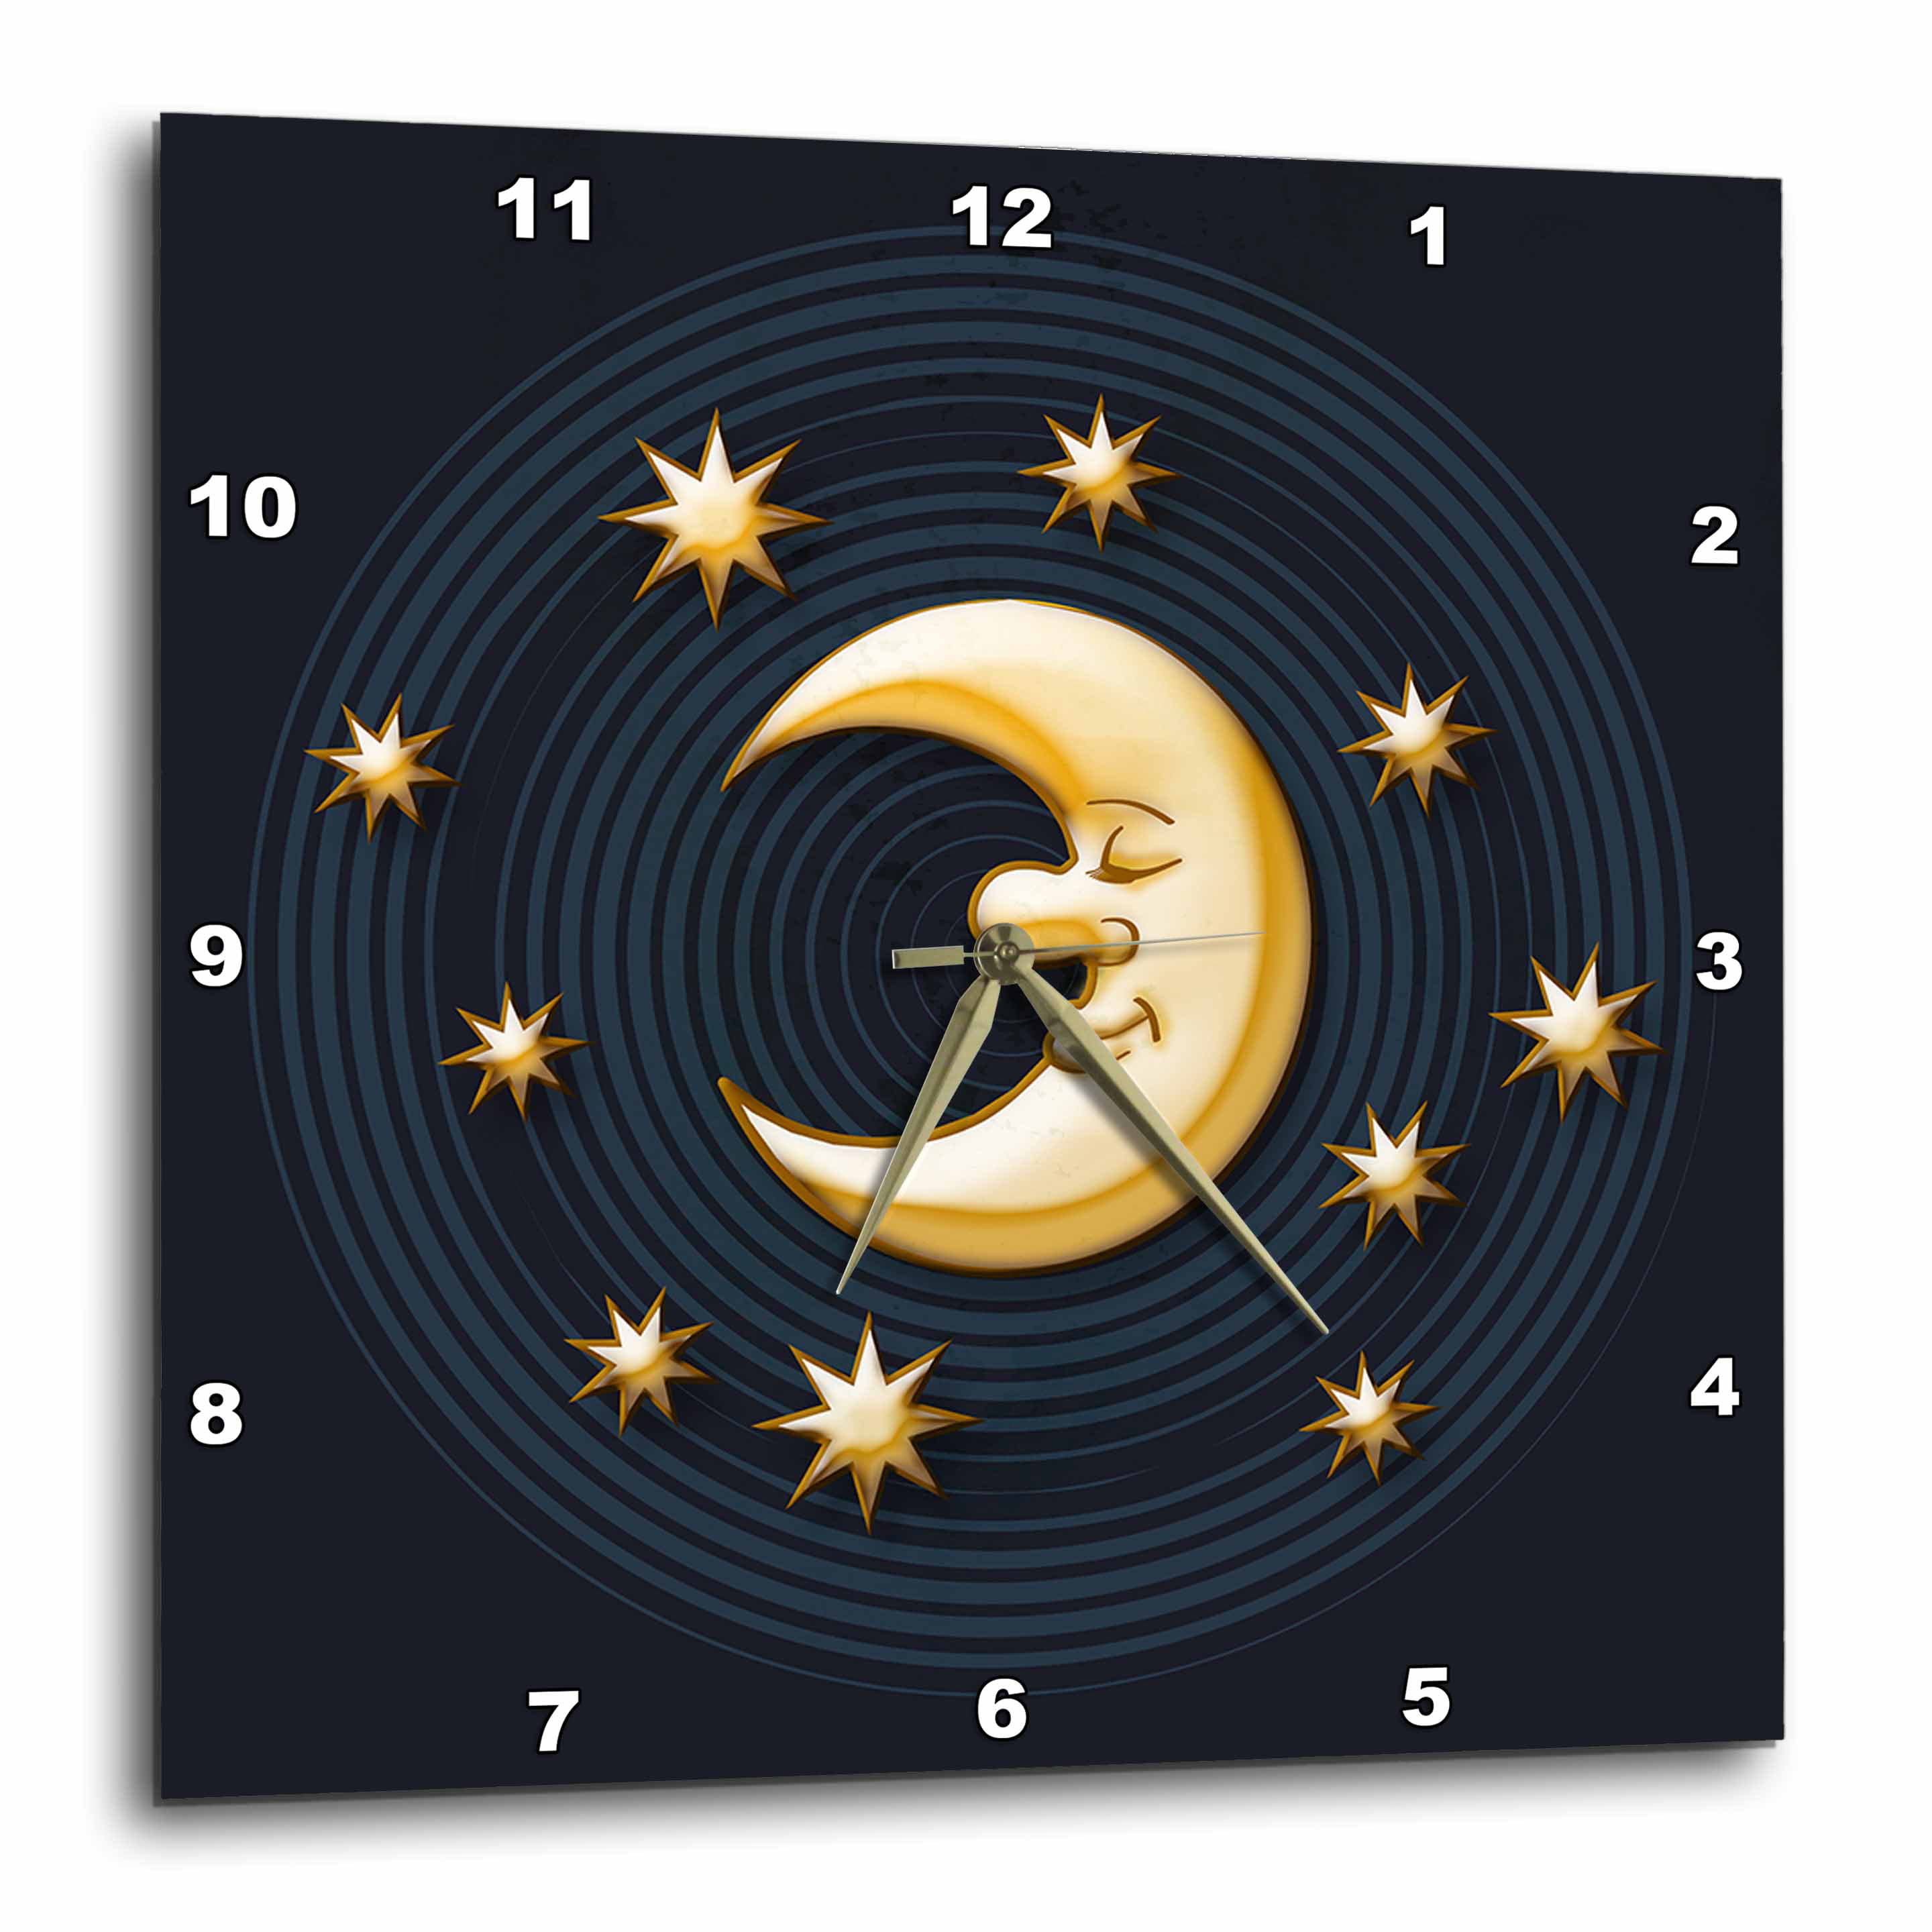 3dRose dpp_24306_1 Moon with Stars Around on Black Background Wall Clock 10 by 10-Inch 